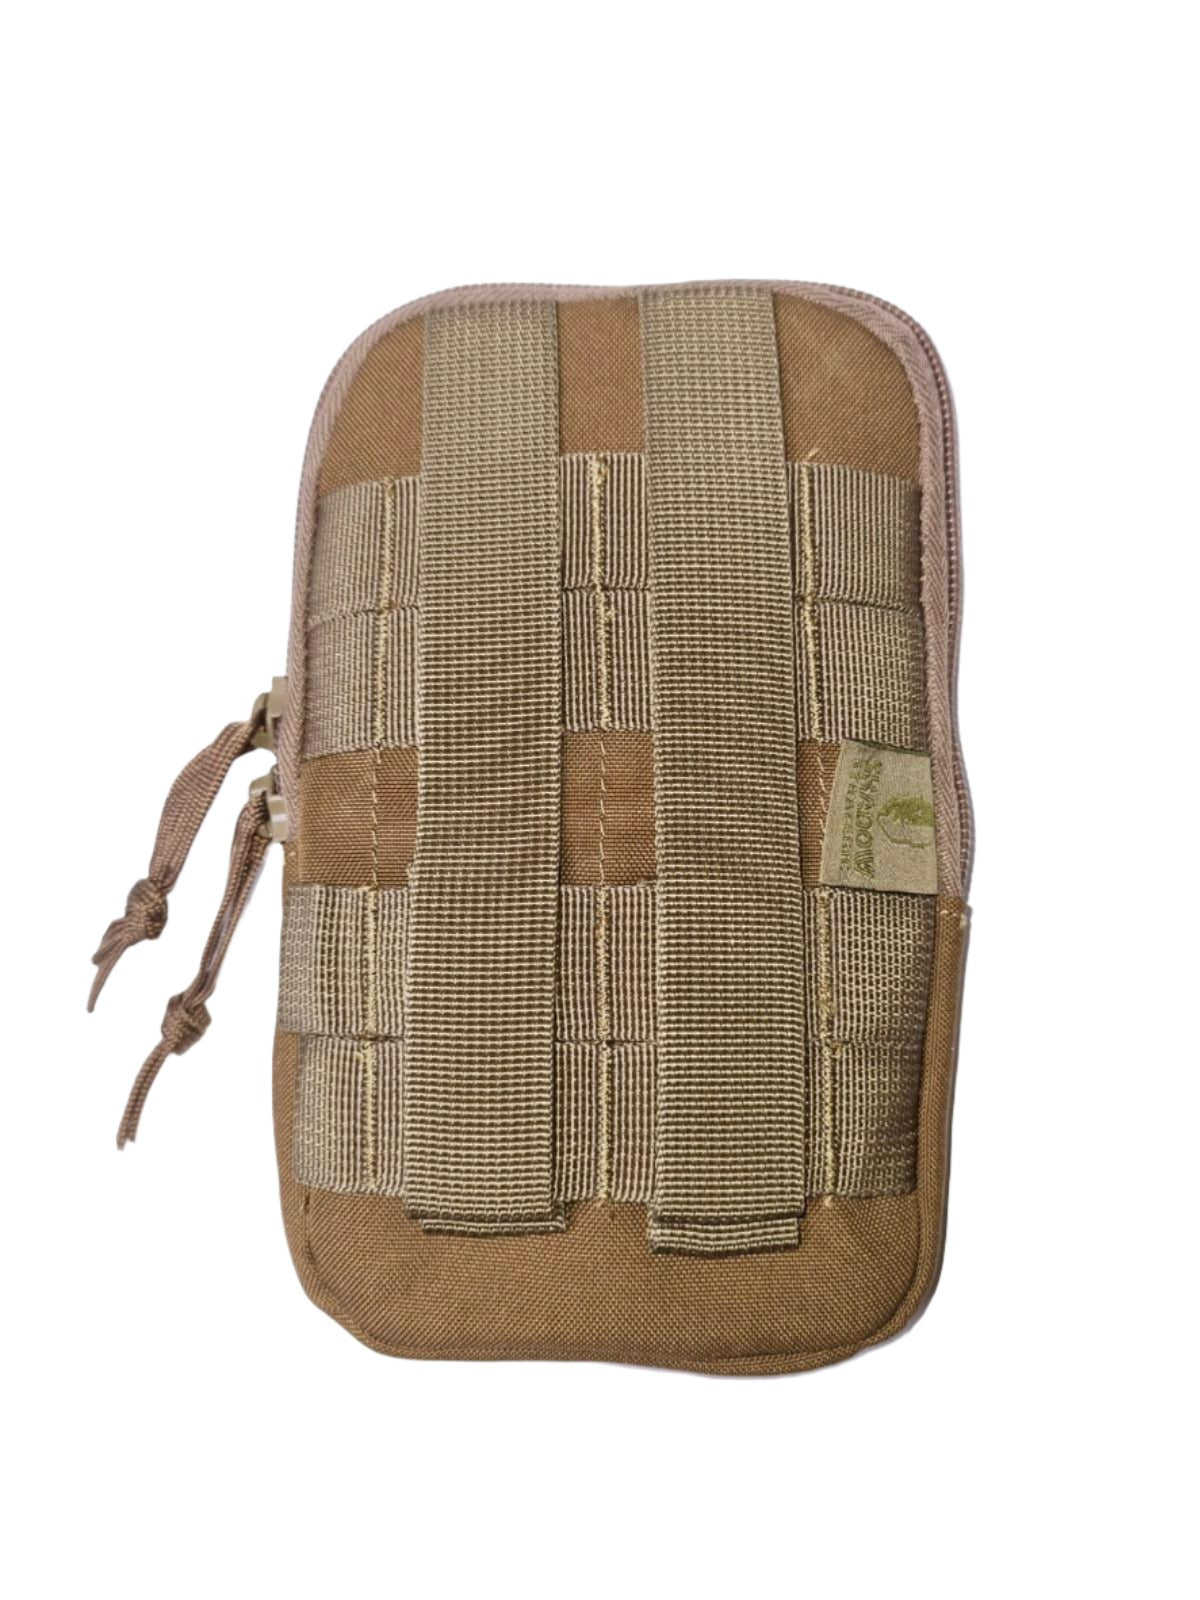 SHS-1038-Cell Phone Pouch with Molle loop-COYOTE